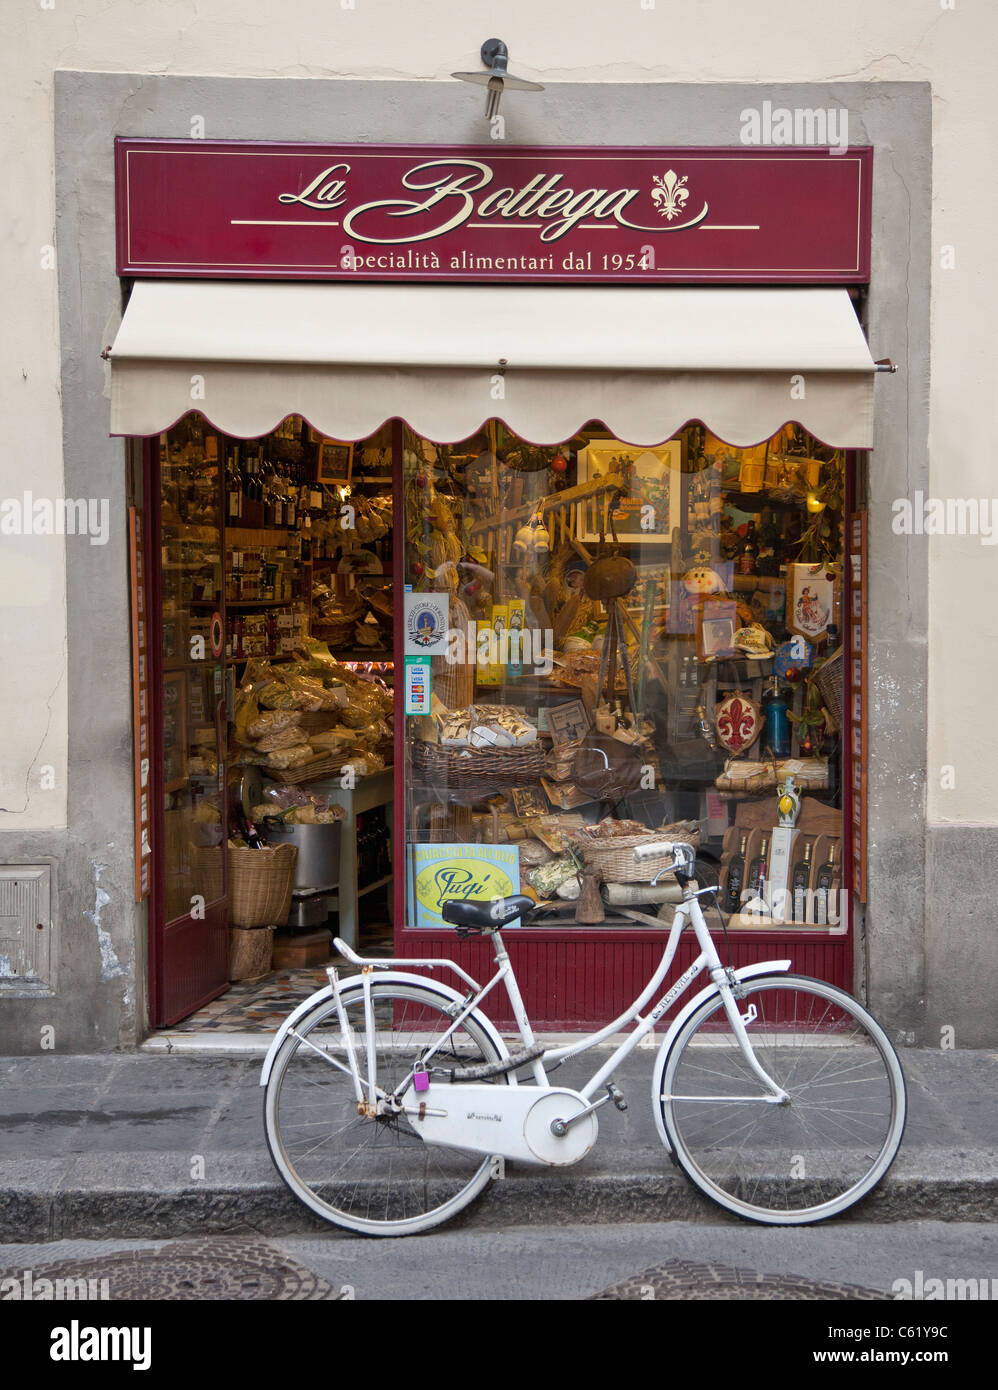 Alimentiri, grocery store with bicycle parked, Florence, Italy Stock Photo